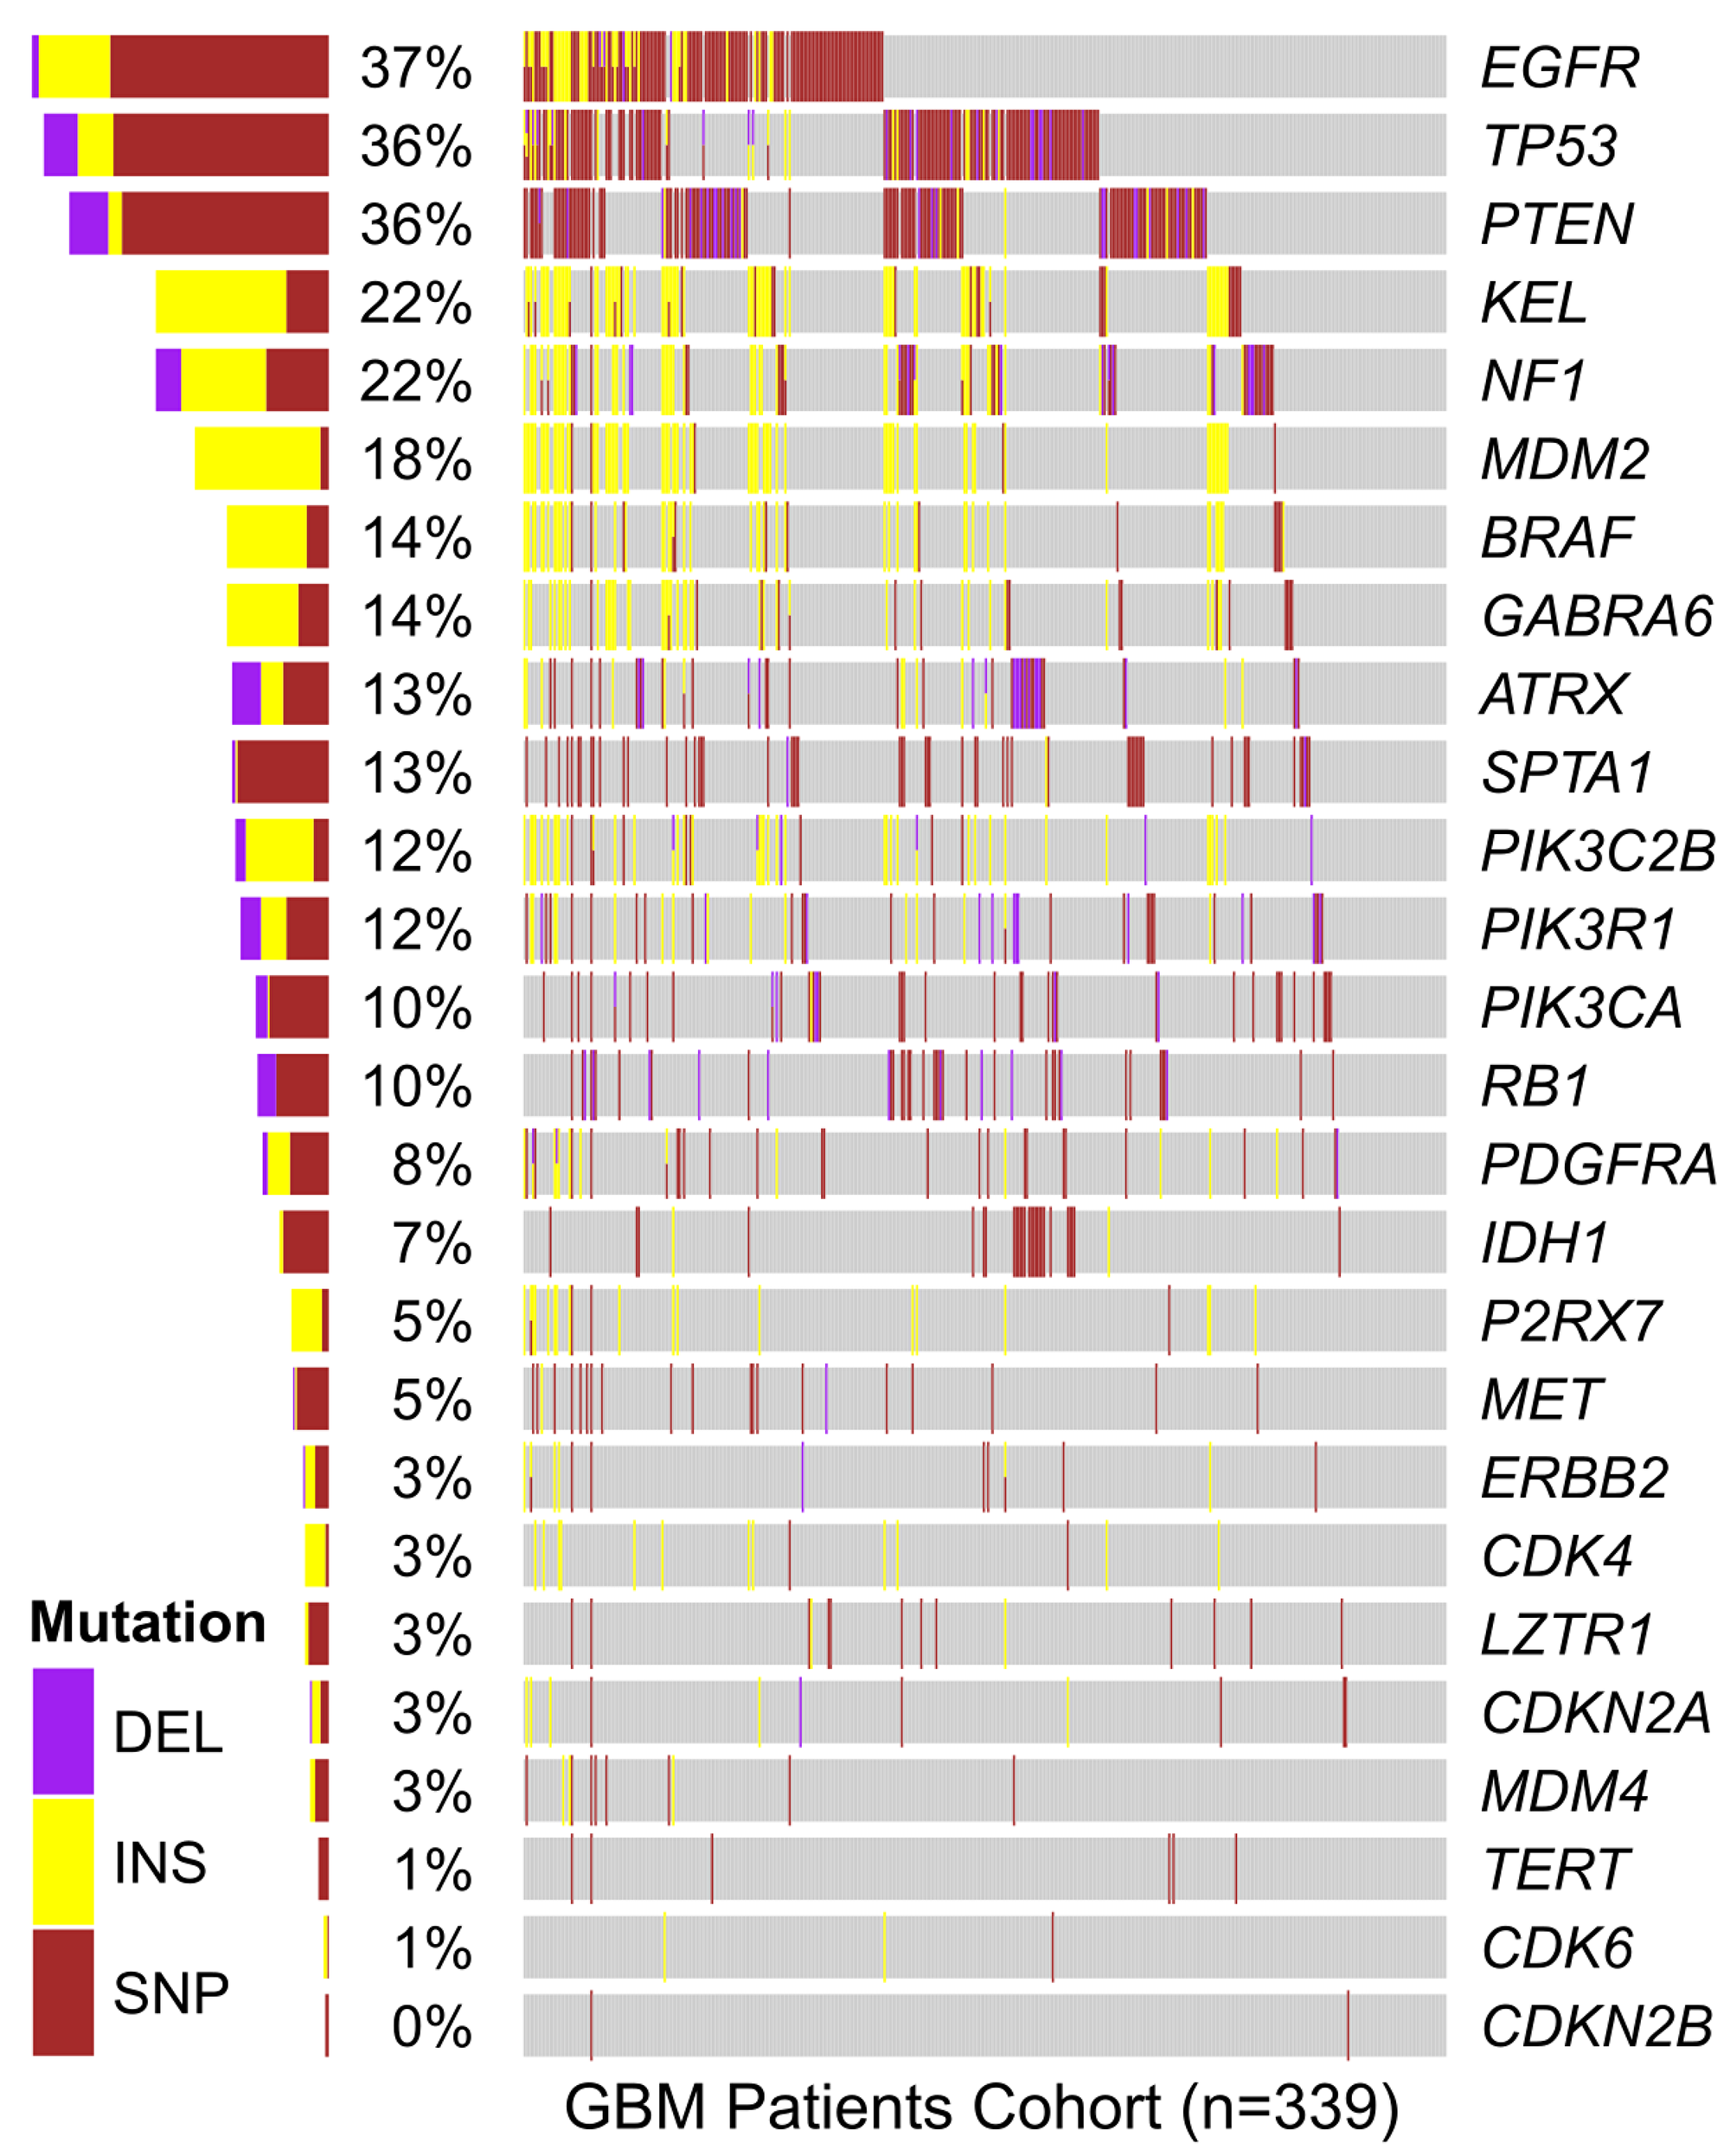 In silico analysis of genetic mutations found in GBM samples from the TCGA cohort.